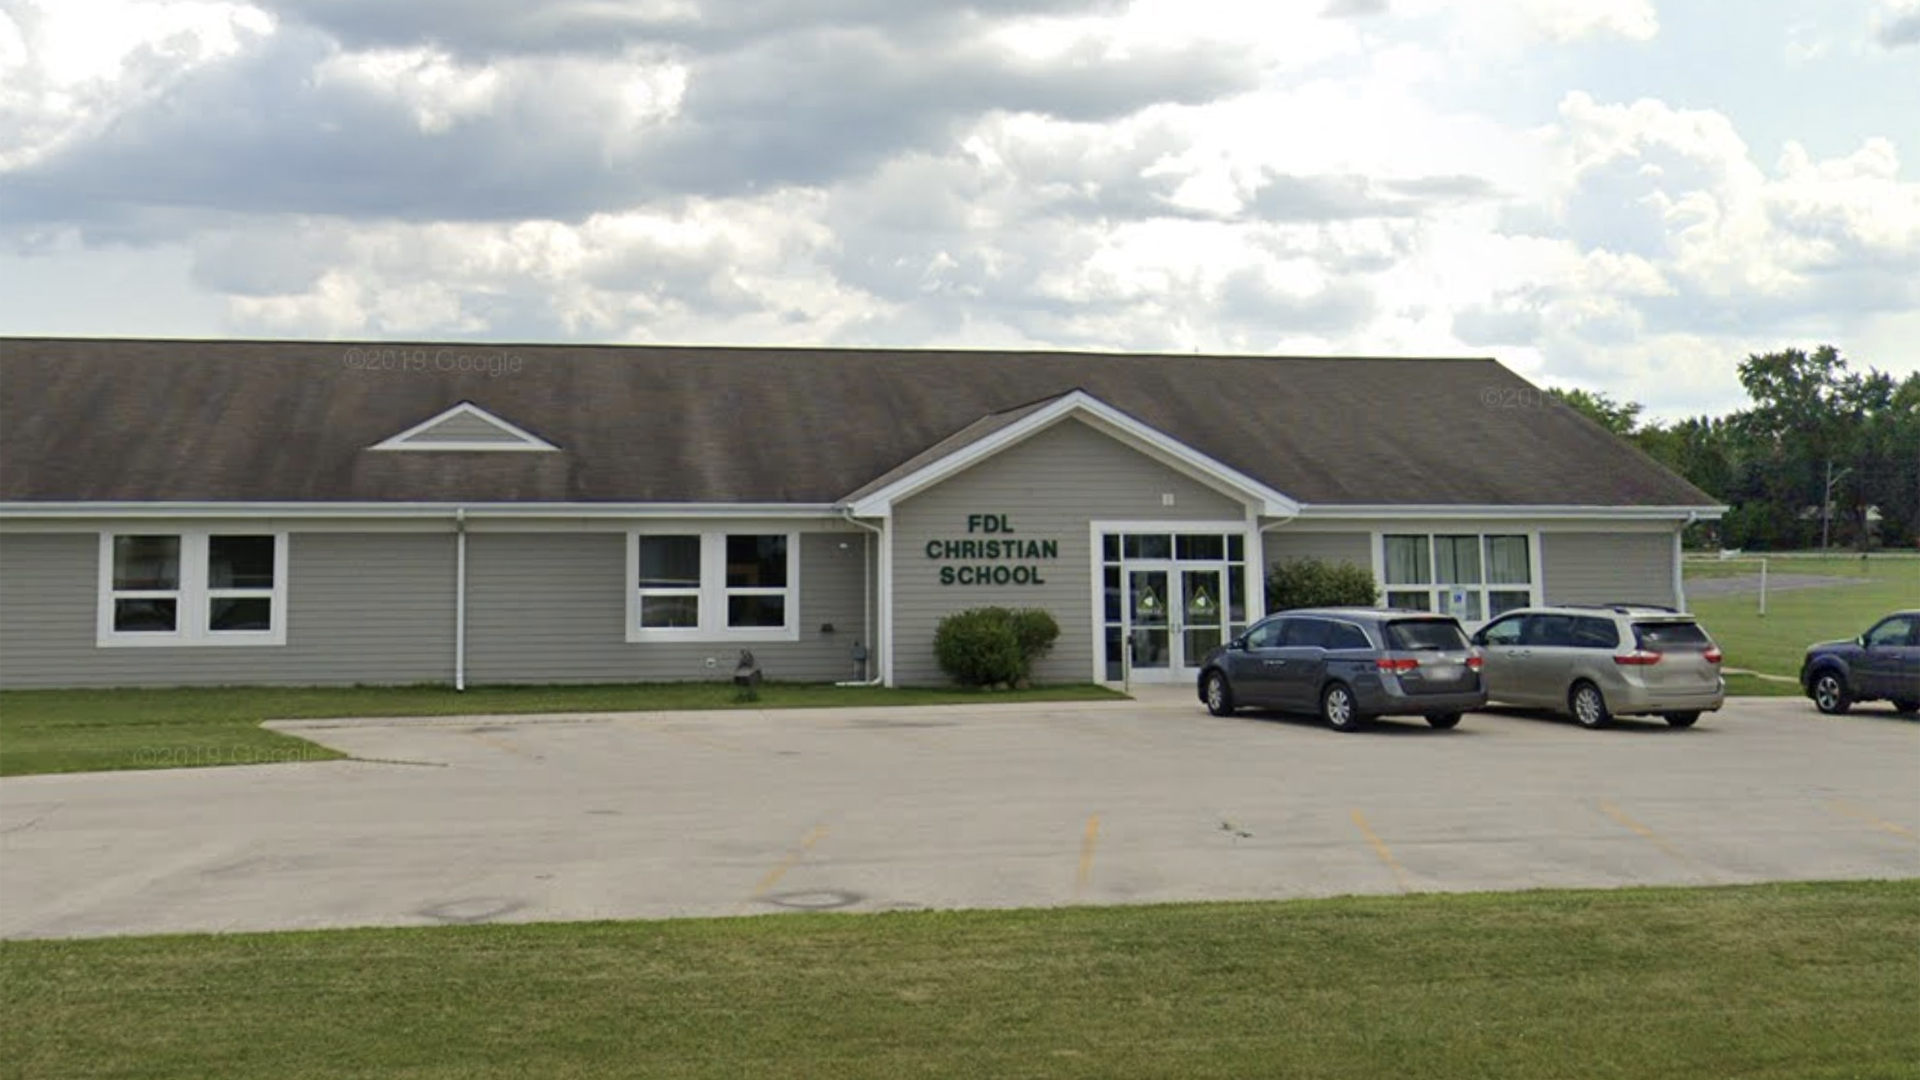 A Google Maps photo shows a one-story building with a sign reading "FDL Christian School," with multiple cars in a parking lot in the foreground.